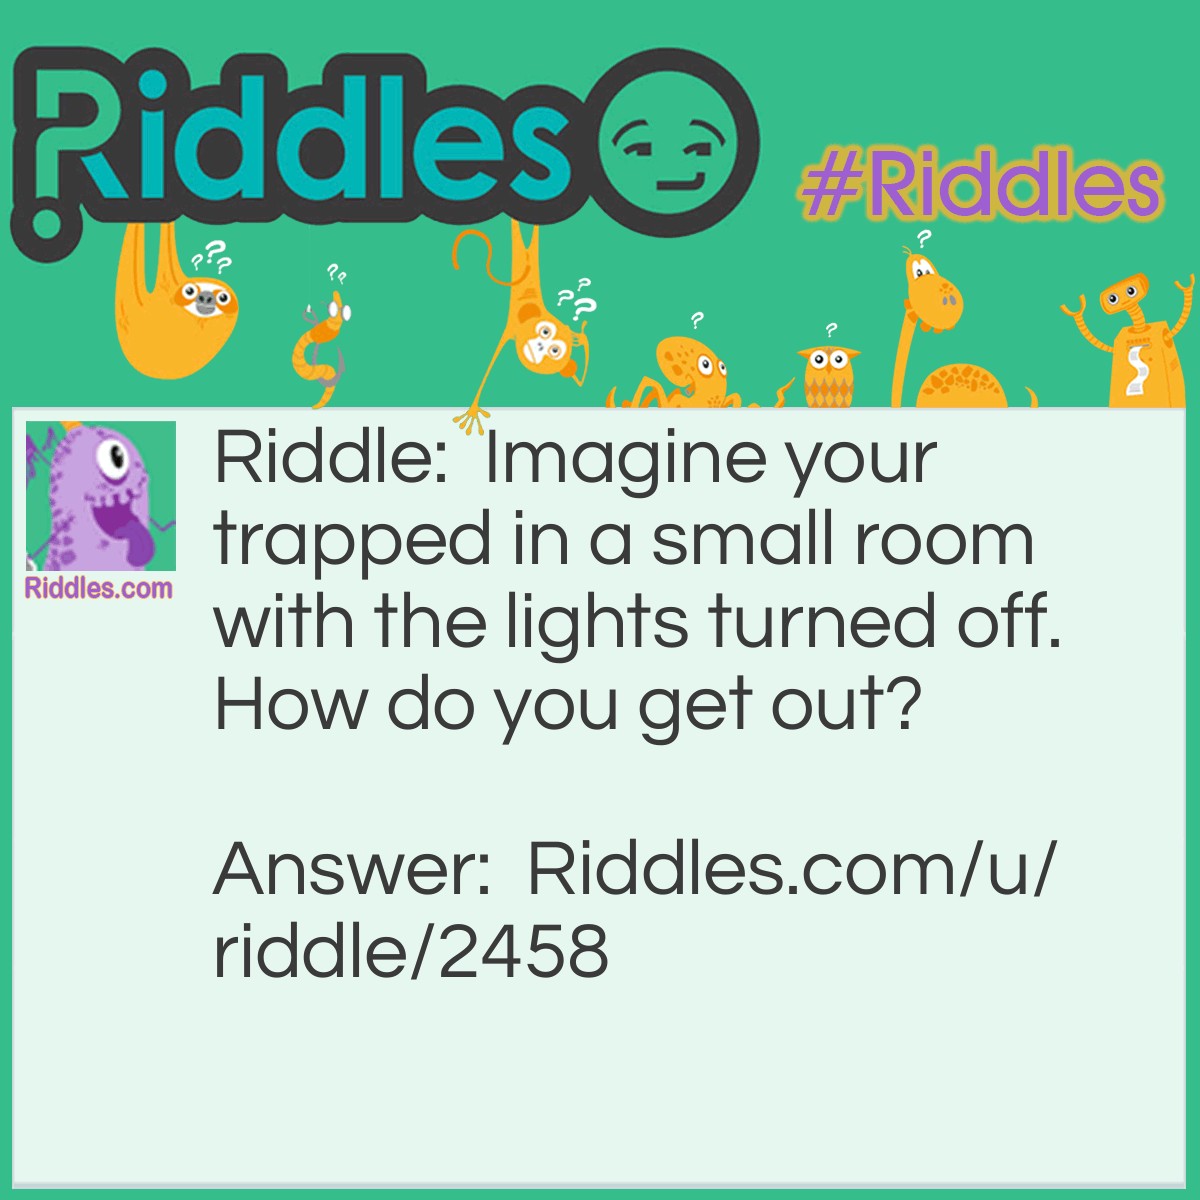 Riddle: Imagine your trapped in a small room with the lights turned off. How do you get out? Answer: Stop imagining.